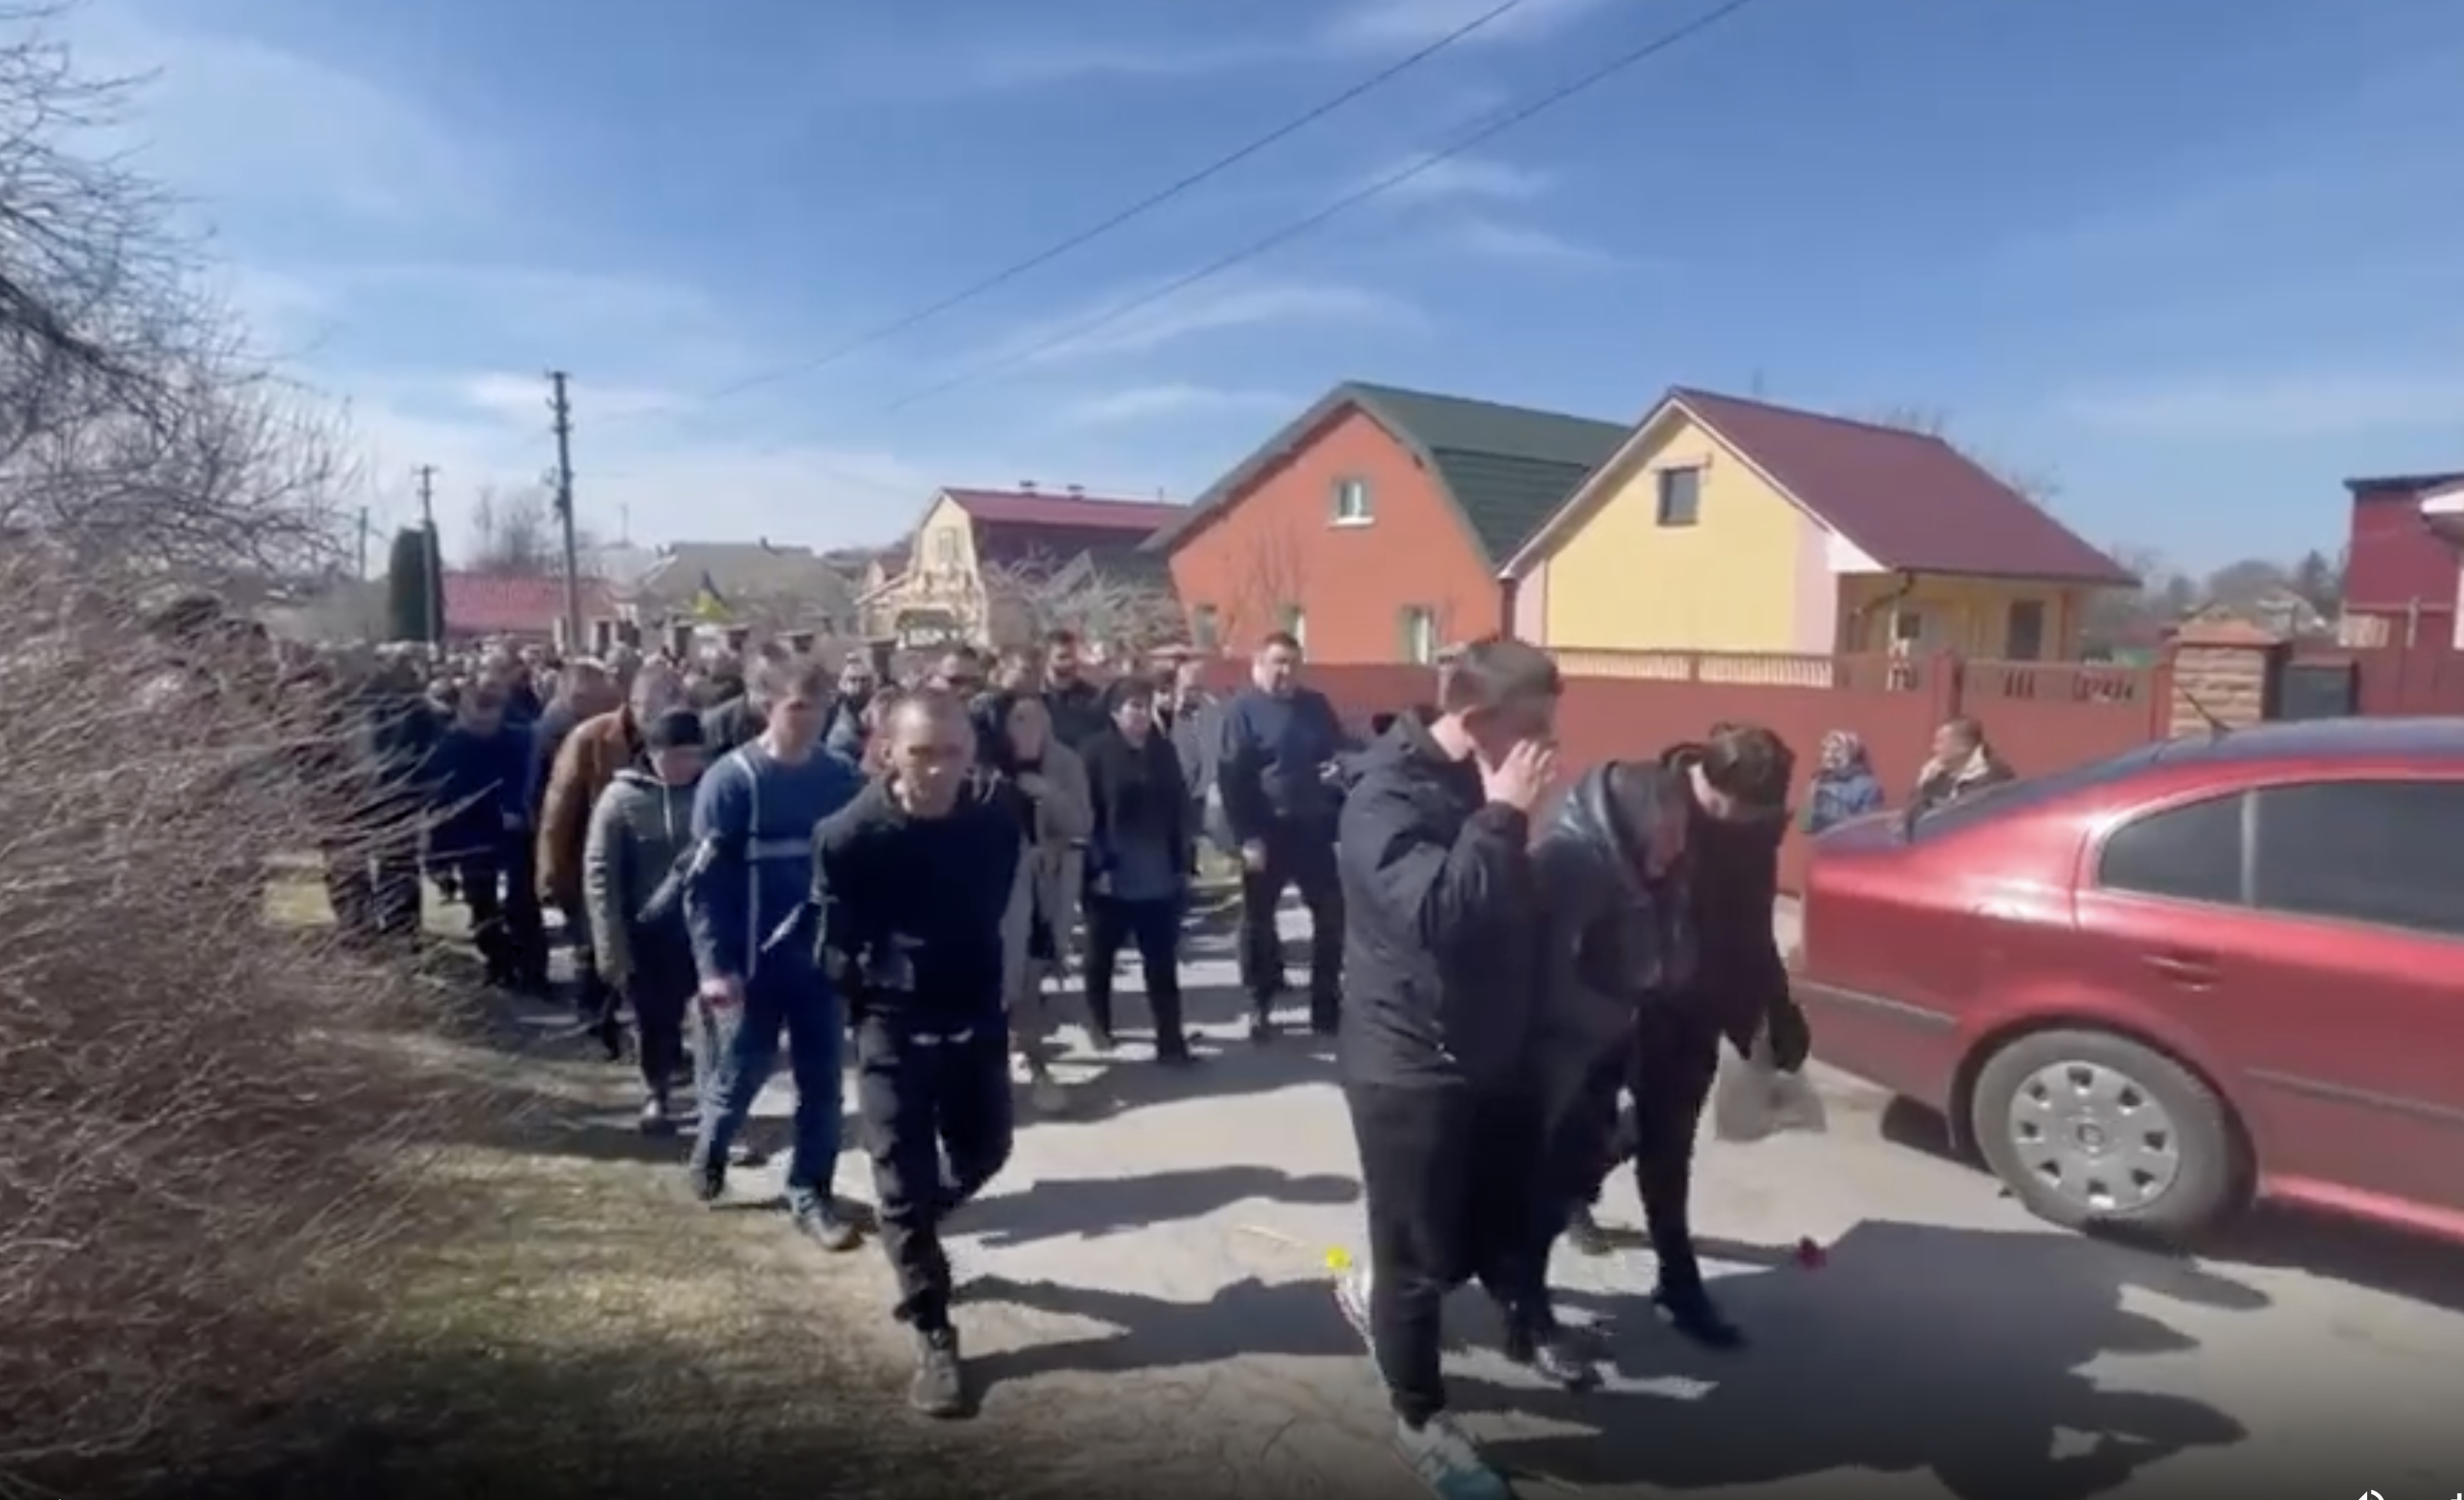 A funeral procession for Olha Sukhenko, a Ukrainian village mayor who was found murdered after Russian forces left the Kyiv region, on April 8.